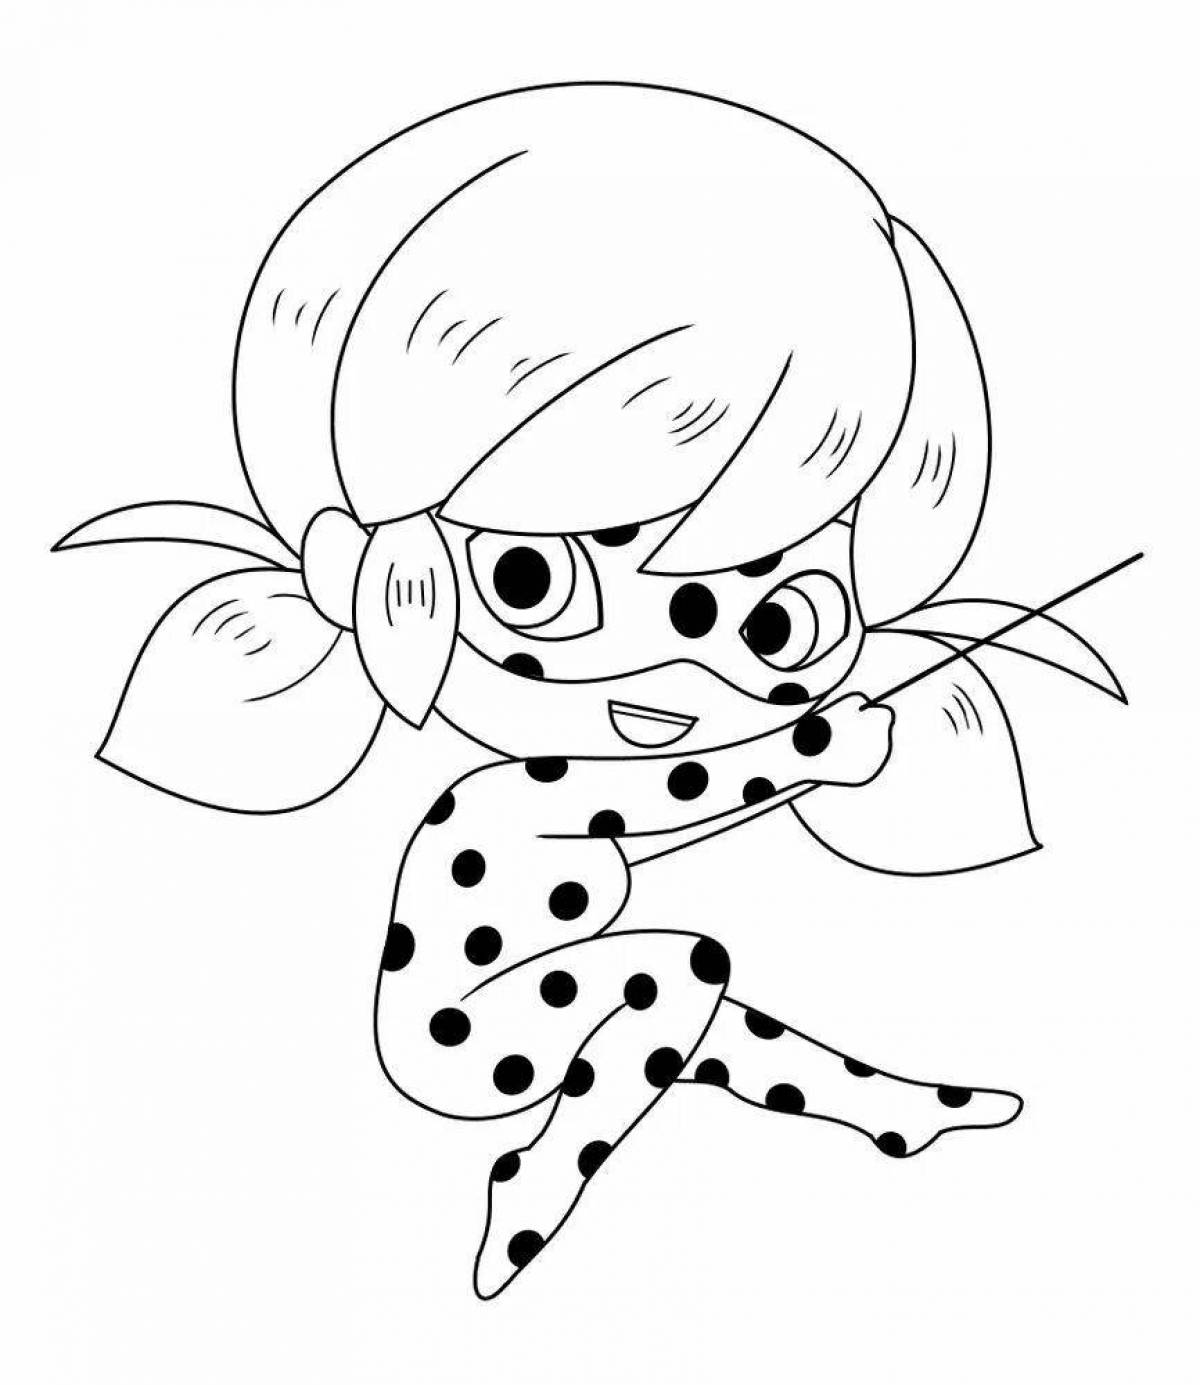 Coloring page glittering ladybug